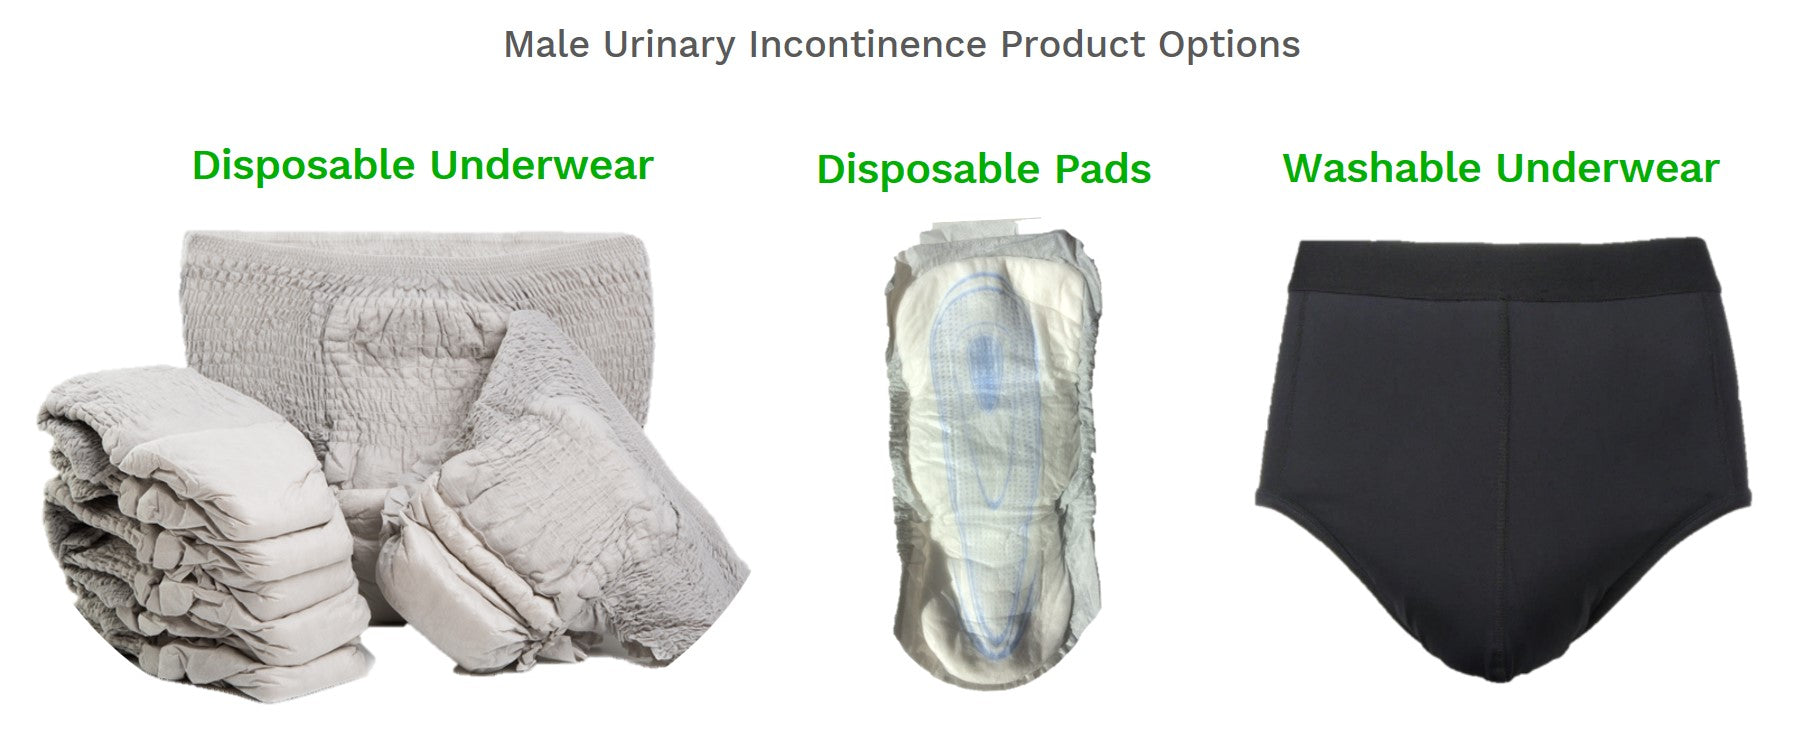 urinary incontinence product options - disposable underwear and pads, washable incontinence underwear